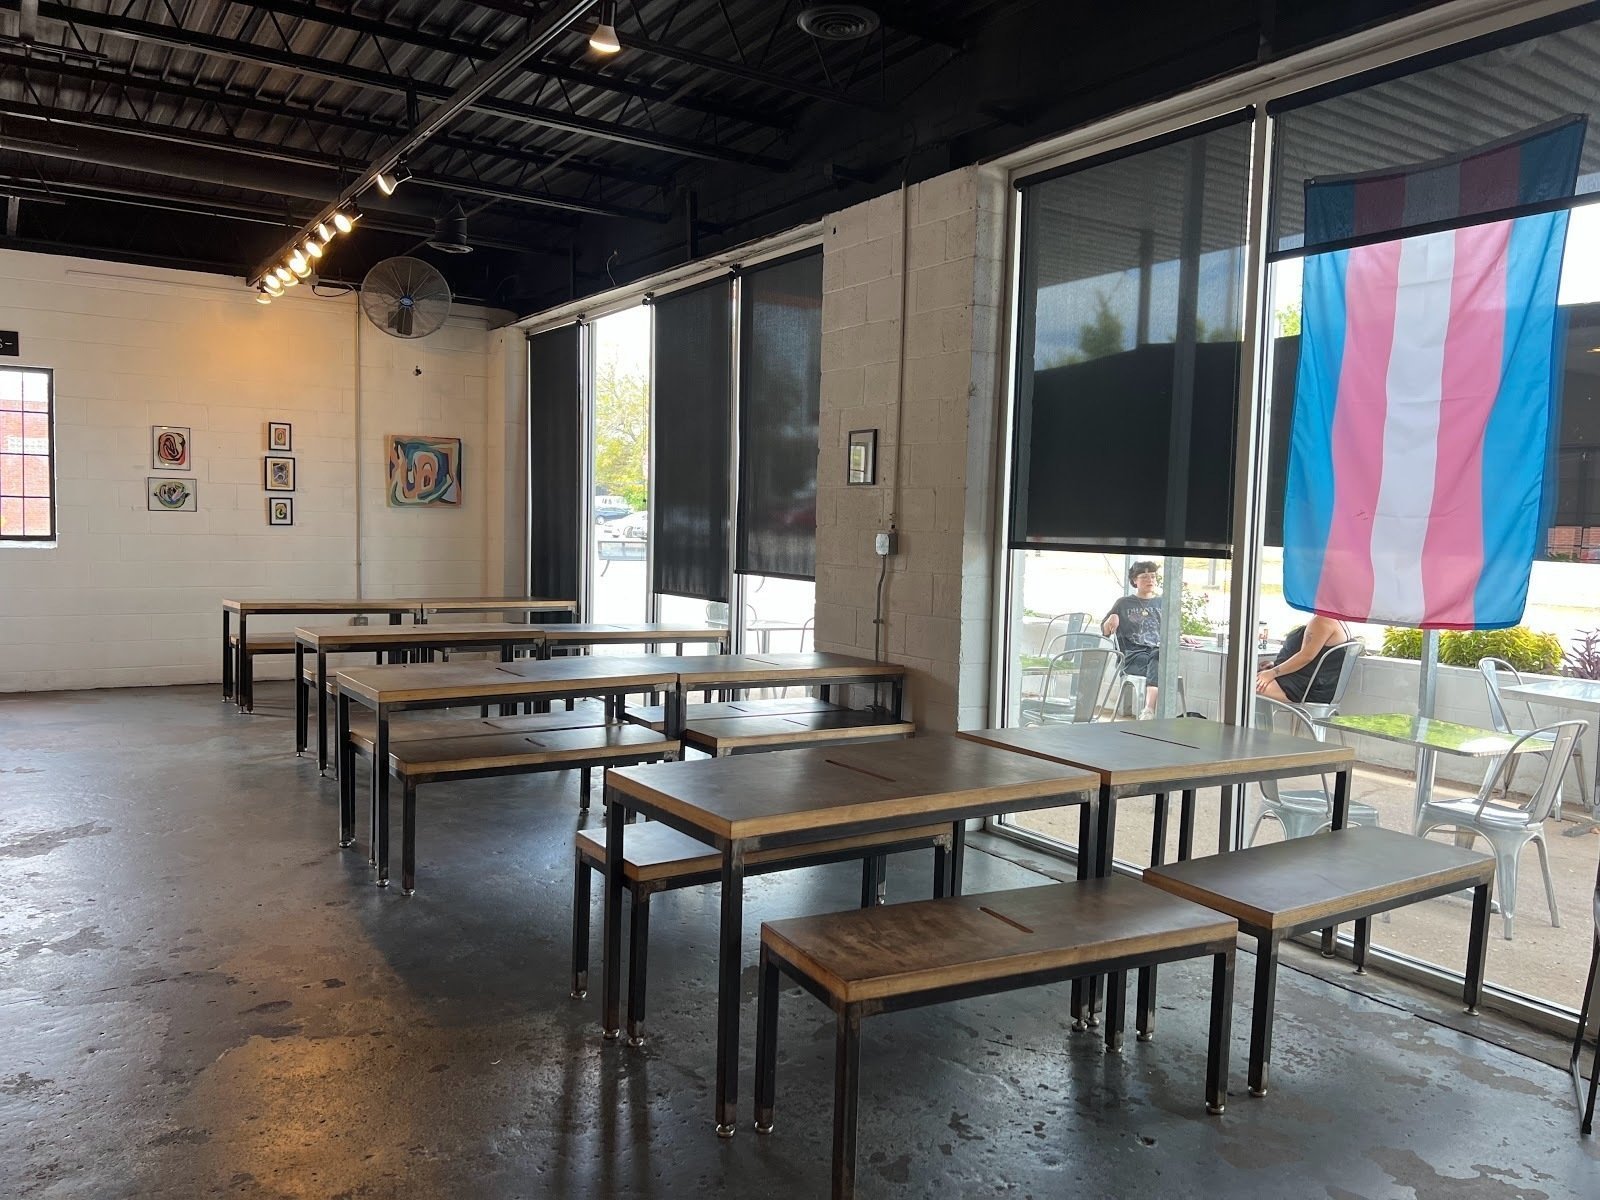 <span class="translation_missing" title="translation missing: en.meta.location_title, location_name: Elemental Coffee, city: Oklahoma City">Location Title</span>